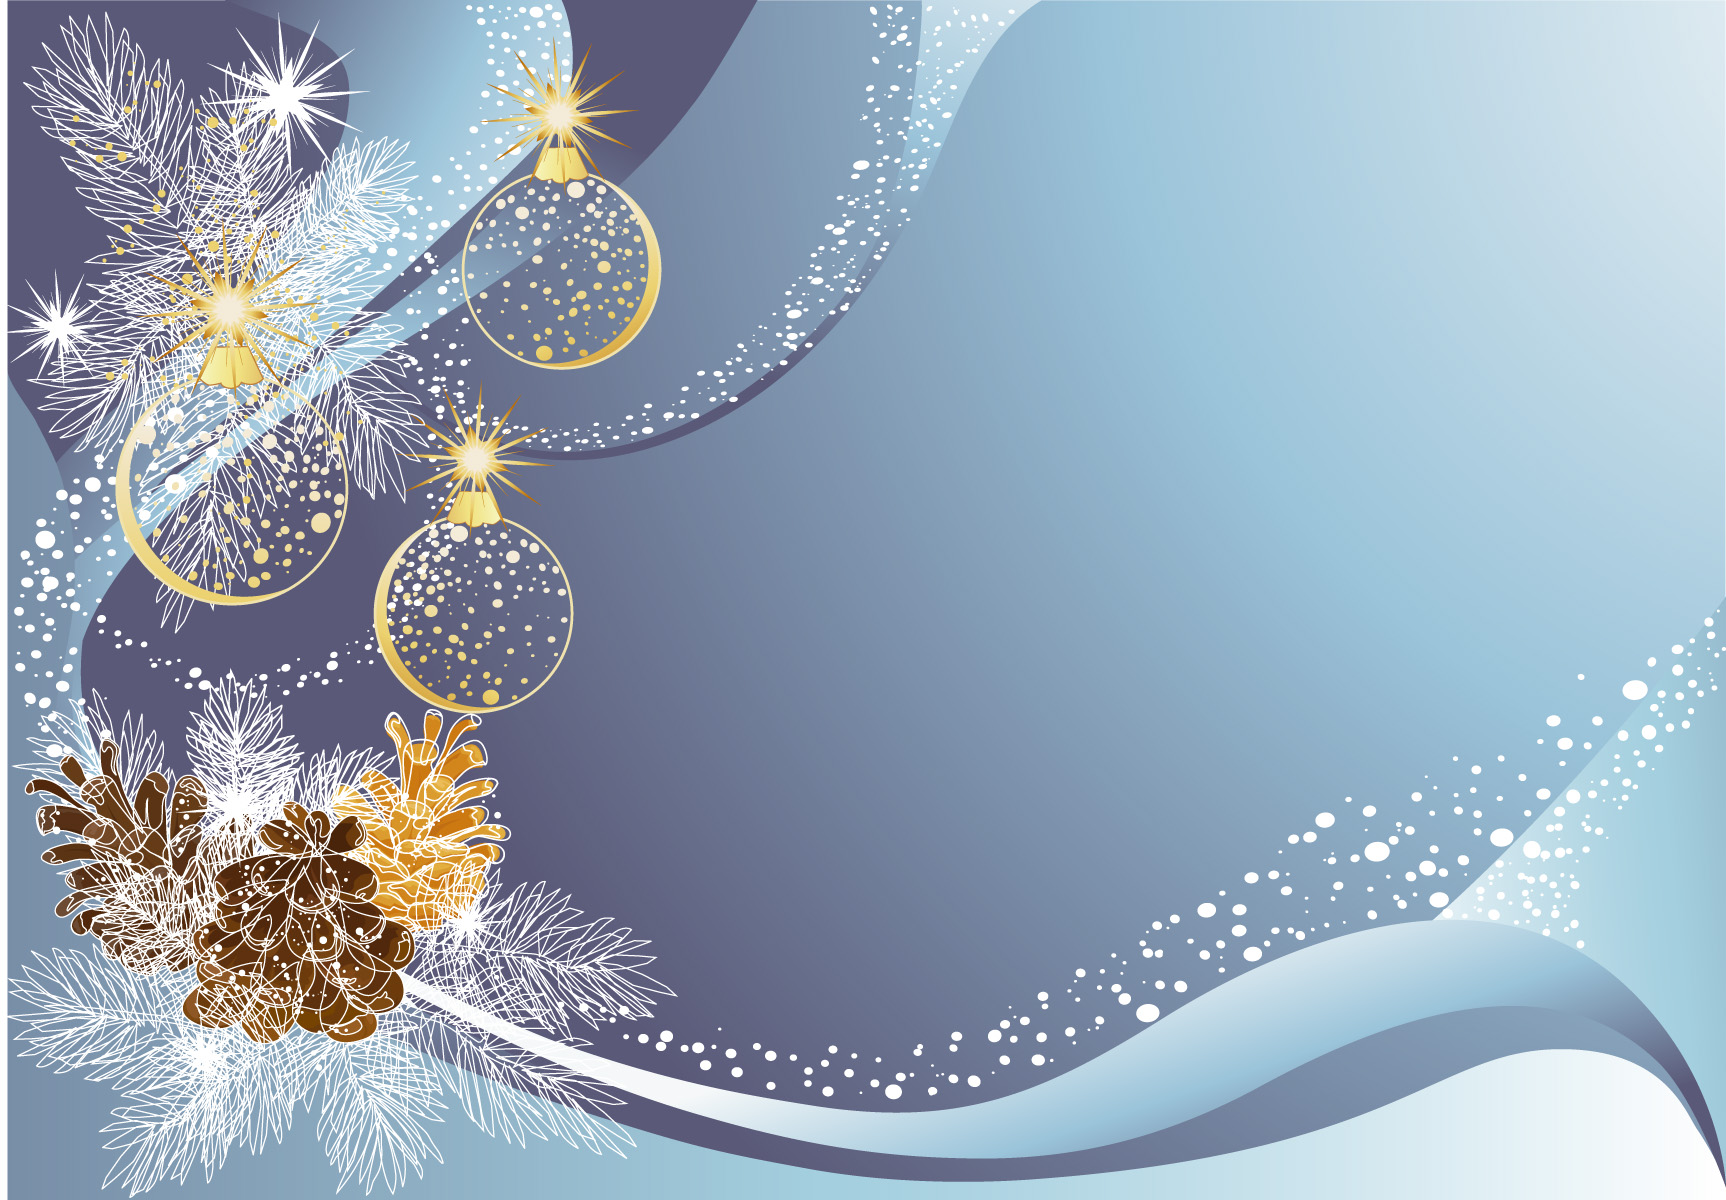 Holiday Background HDq Image Collection For Desktop Vv